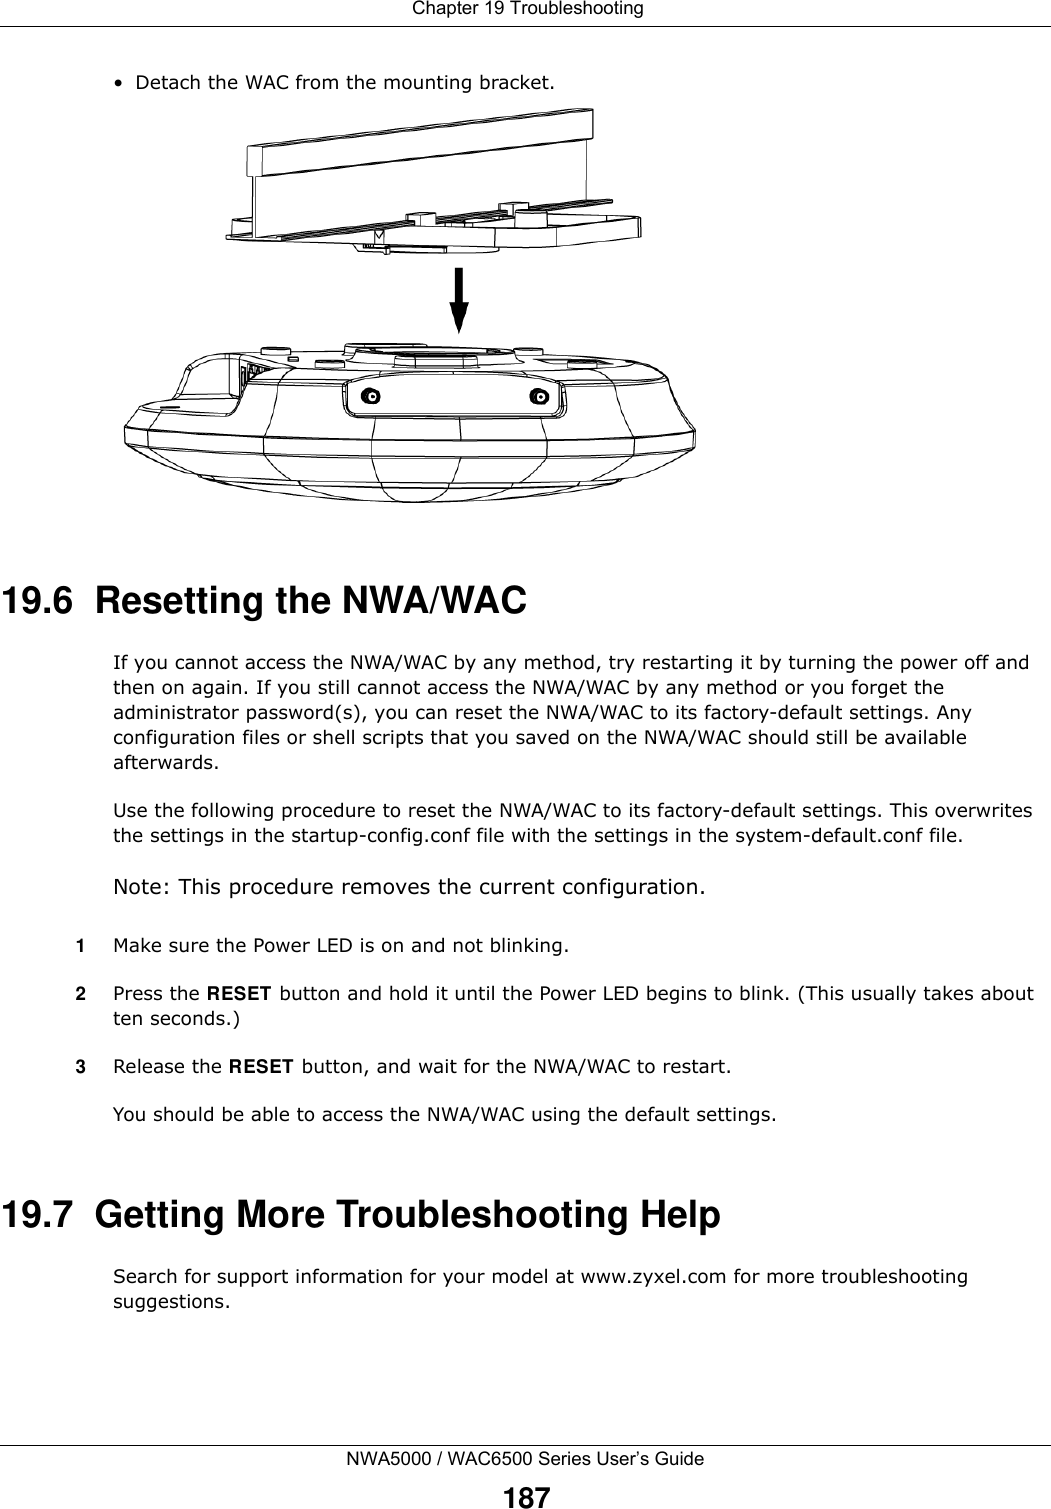  Chapter 19 TroubleshootingNWA5000 / WAC6500 Series User’s Guide187• Detach the WAC from the mounting bracket.19.6  Resetting the NWA/WACIf you cannot access the NWA/WAC by any method, try restarting it by turning the power off and then on again. If you still cannot access the NWA/WAC by any method or you forget the administrator password(s), you can reset the NWA/WAC to its factory-default settings. Any configuration files or shell scripts that you saved on the NWA/WAC should still be available afterwards.Use the following procedure to reset the NWA/WAC to its factory-default settings. This overwrites the settings in the startup-config.conf file with the settings in the system-default.conf file. Note: This procedure removes the current configuration. 1Make sure the Power LED is on and not blinking.2Press the RESET button and hold it until the Power LED begins to blink. (This usually takes about ten seconds.)3Release the RESET button, and wait for the NWA/WAC to restart.You should be able to access the NWA/WAC using the default settings.19.7  Getting More Troubleshooting HelpSearch for support information for your model at www.zyxel.com for more troubleshooting suggestions.